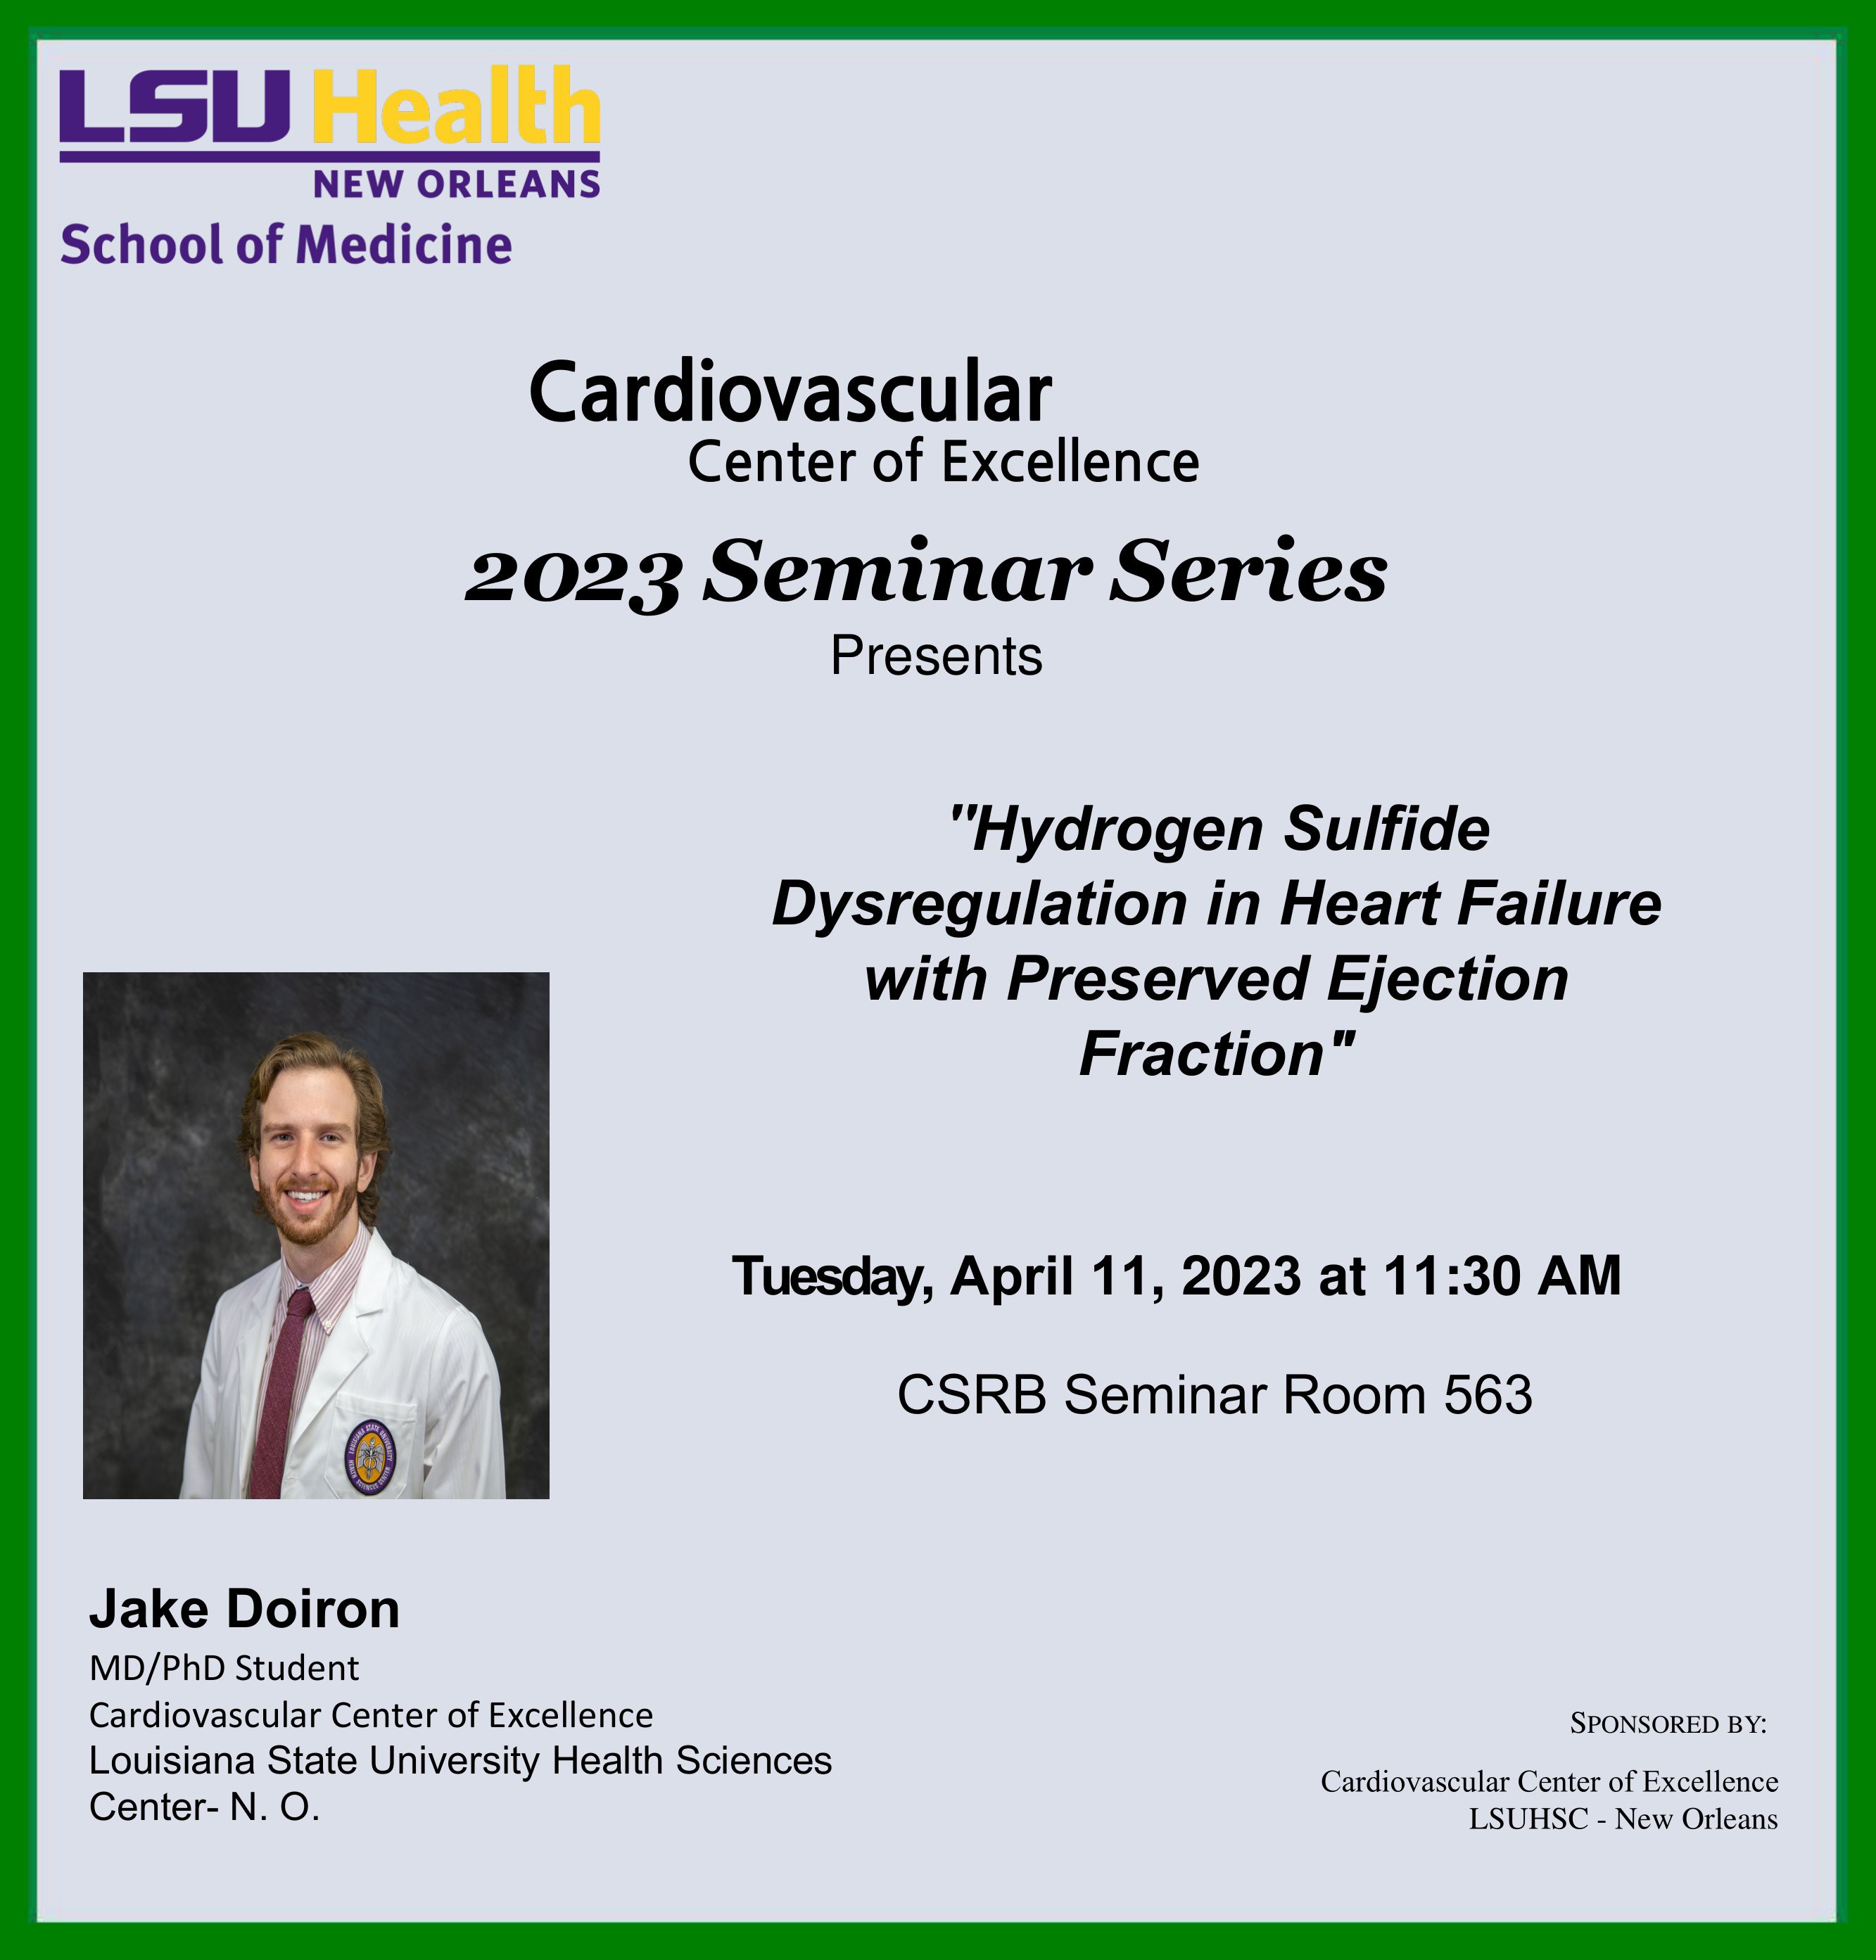 Event Title: Cardiovascular Seminar Series Jake Doiron, Event Date: April 11, Starting at 11:30 AM and ending at 12:30 PM in Building: Clinical Sciences Research Building Room: 563